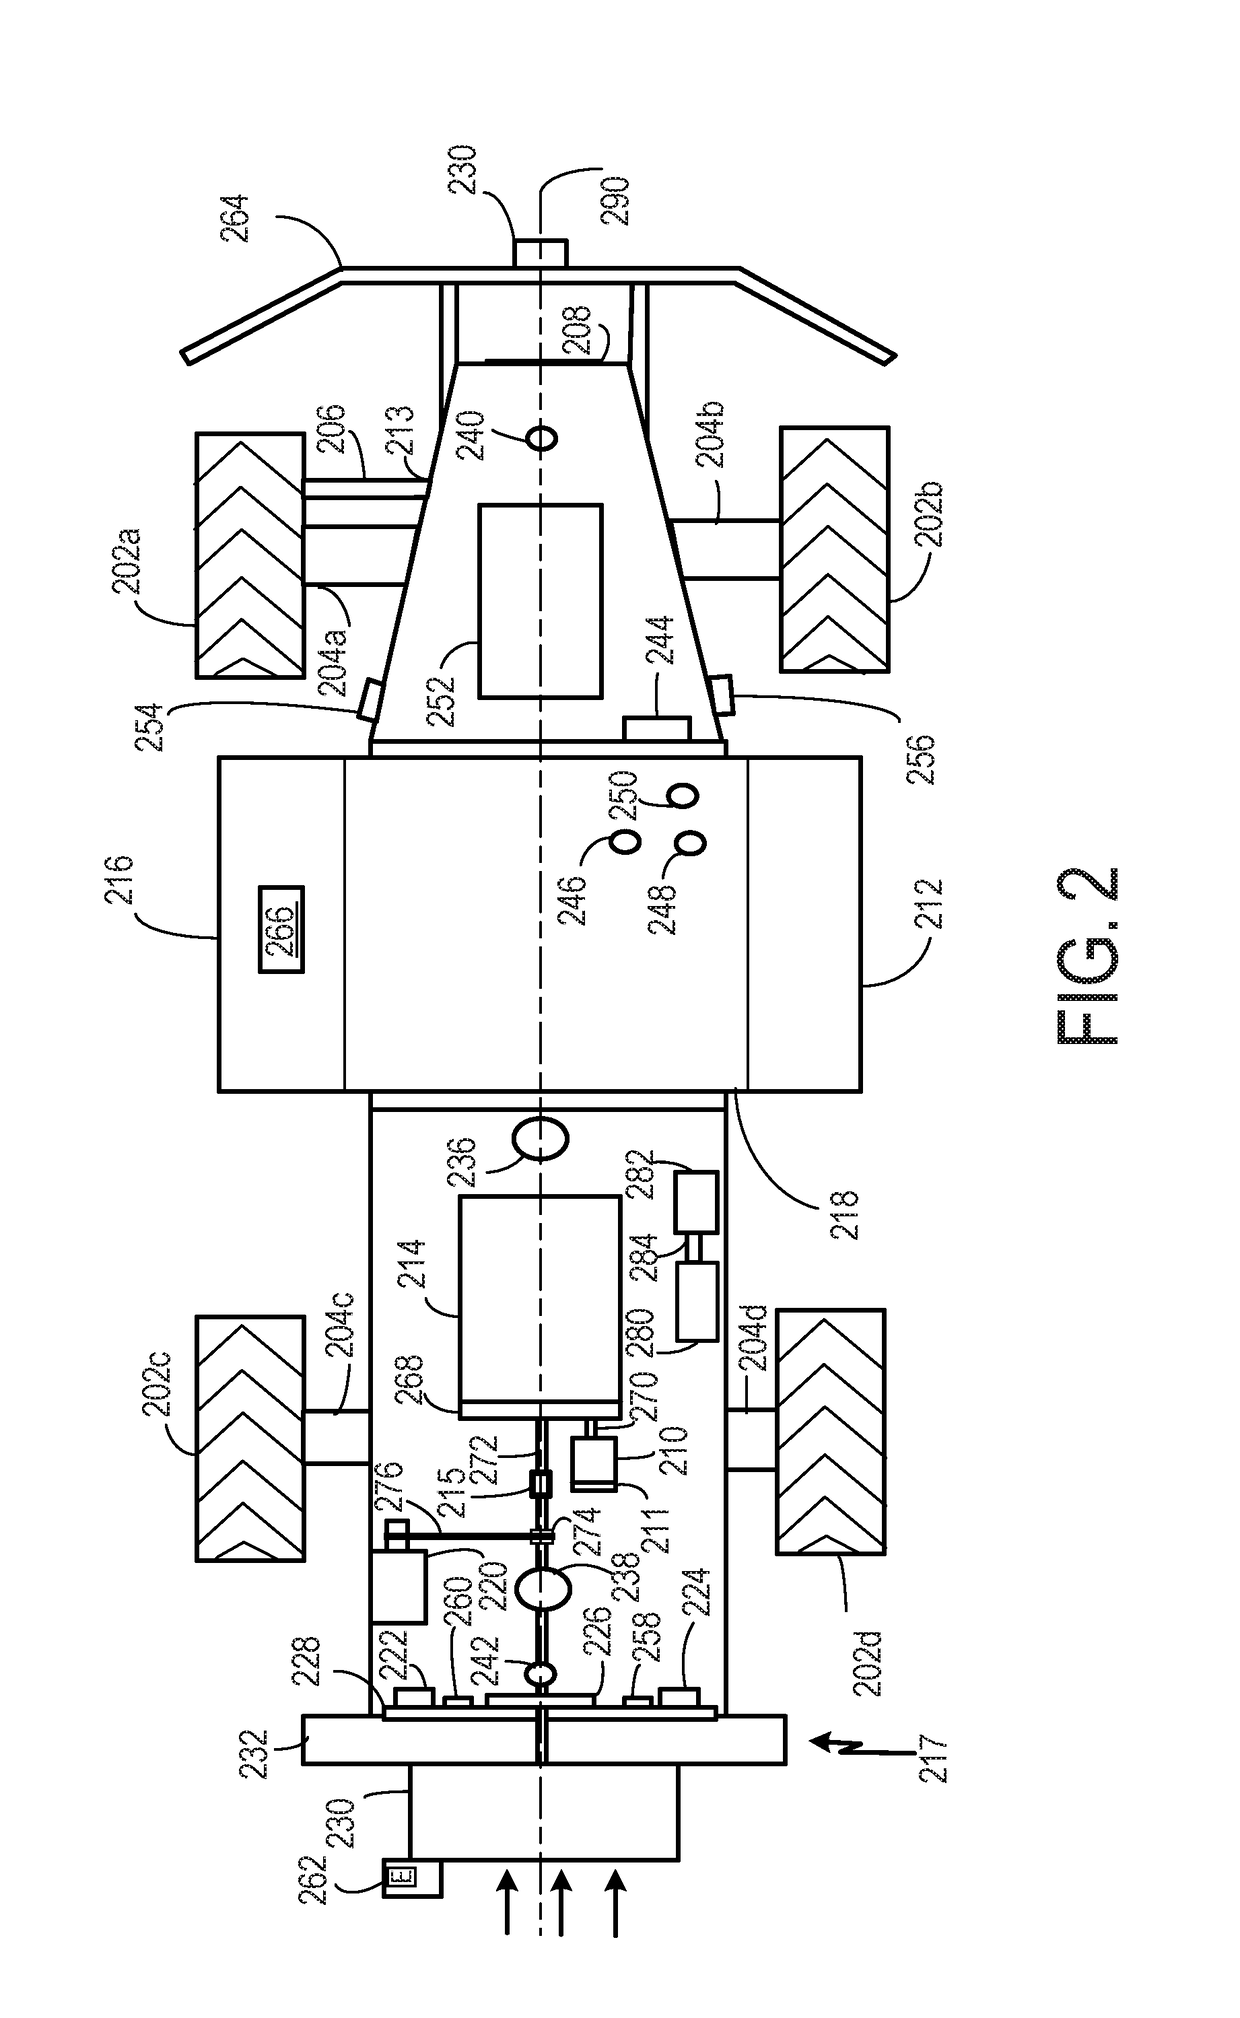 Robotic agricultural system and method